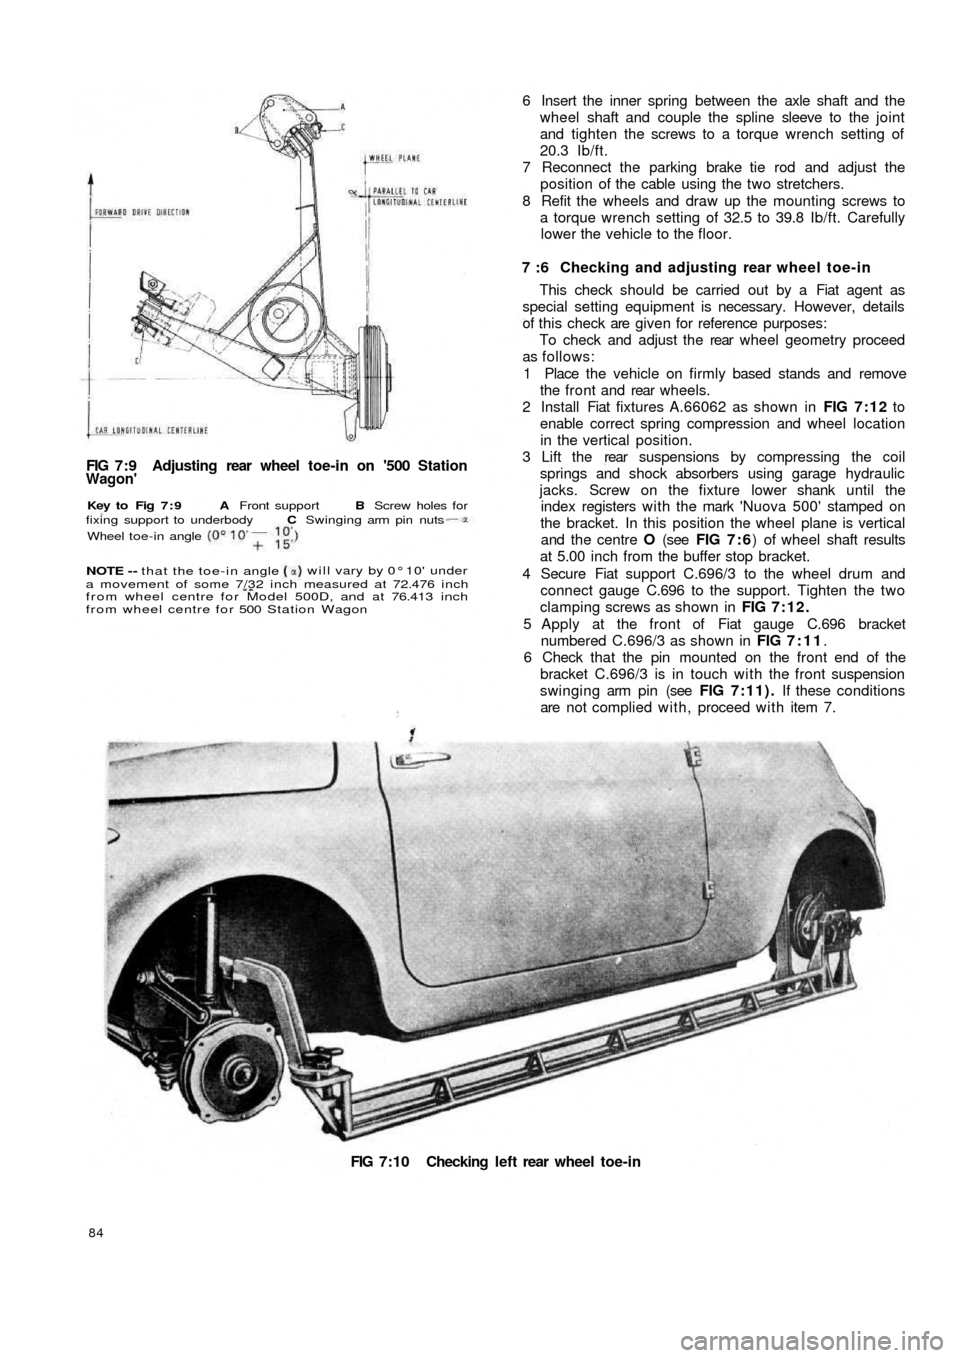 FIAT 500 1968 1.G Workshop Manual FIG 7:9  Adjusting  rear  wheel toe-in on 500 StationWagon
FIG 7:10 Checking left rear wheel toe-in
84
6 Insert the inner spring between the axle shaft and the
wheel shaft and couple the spline slee